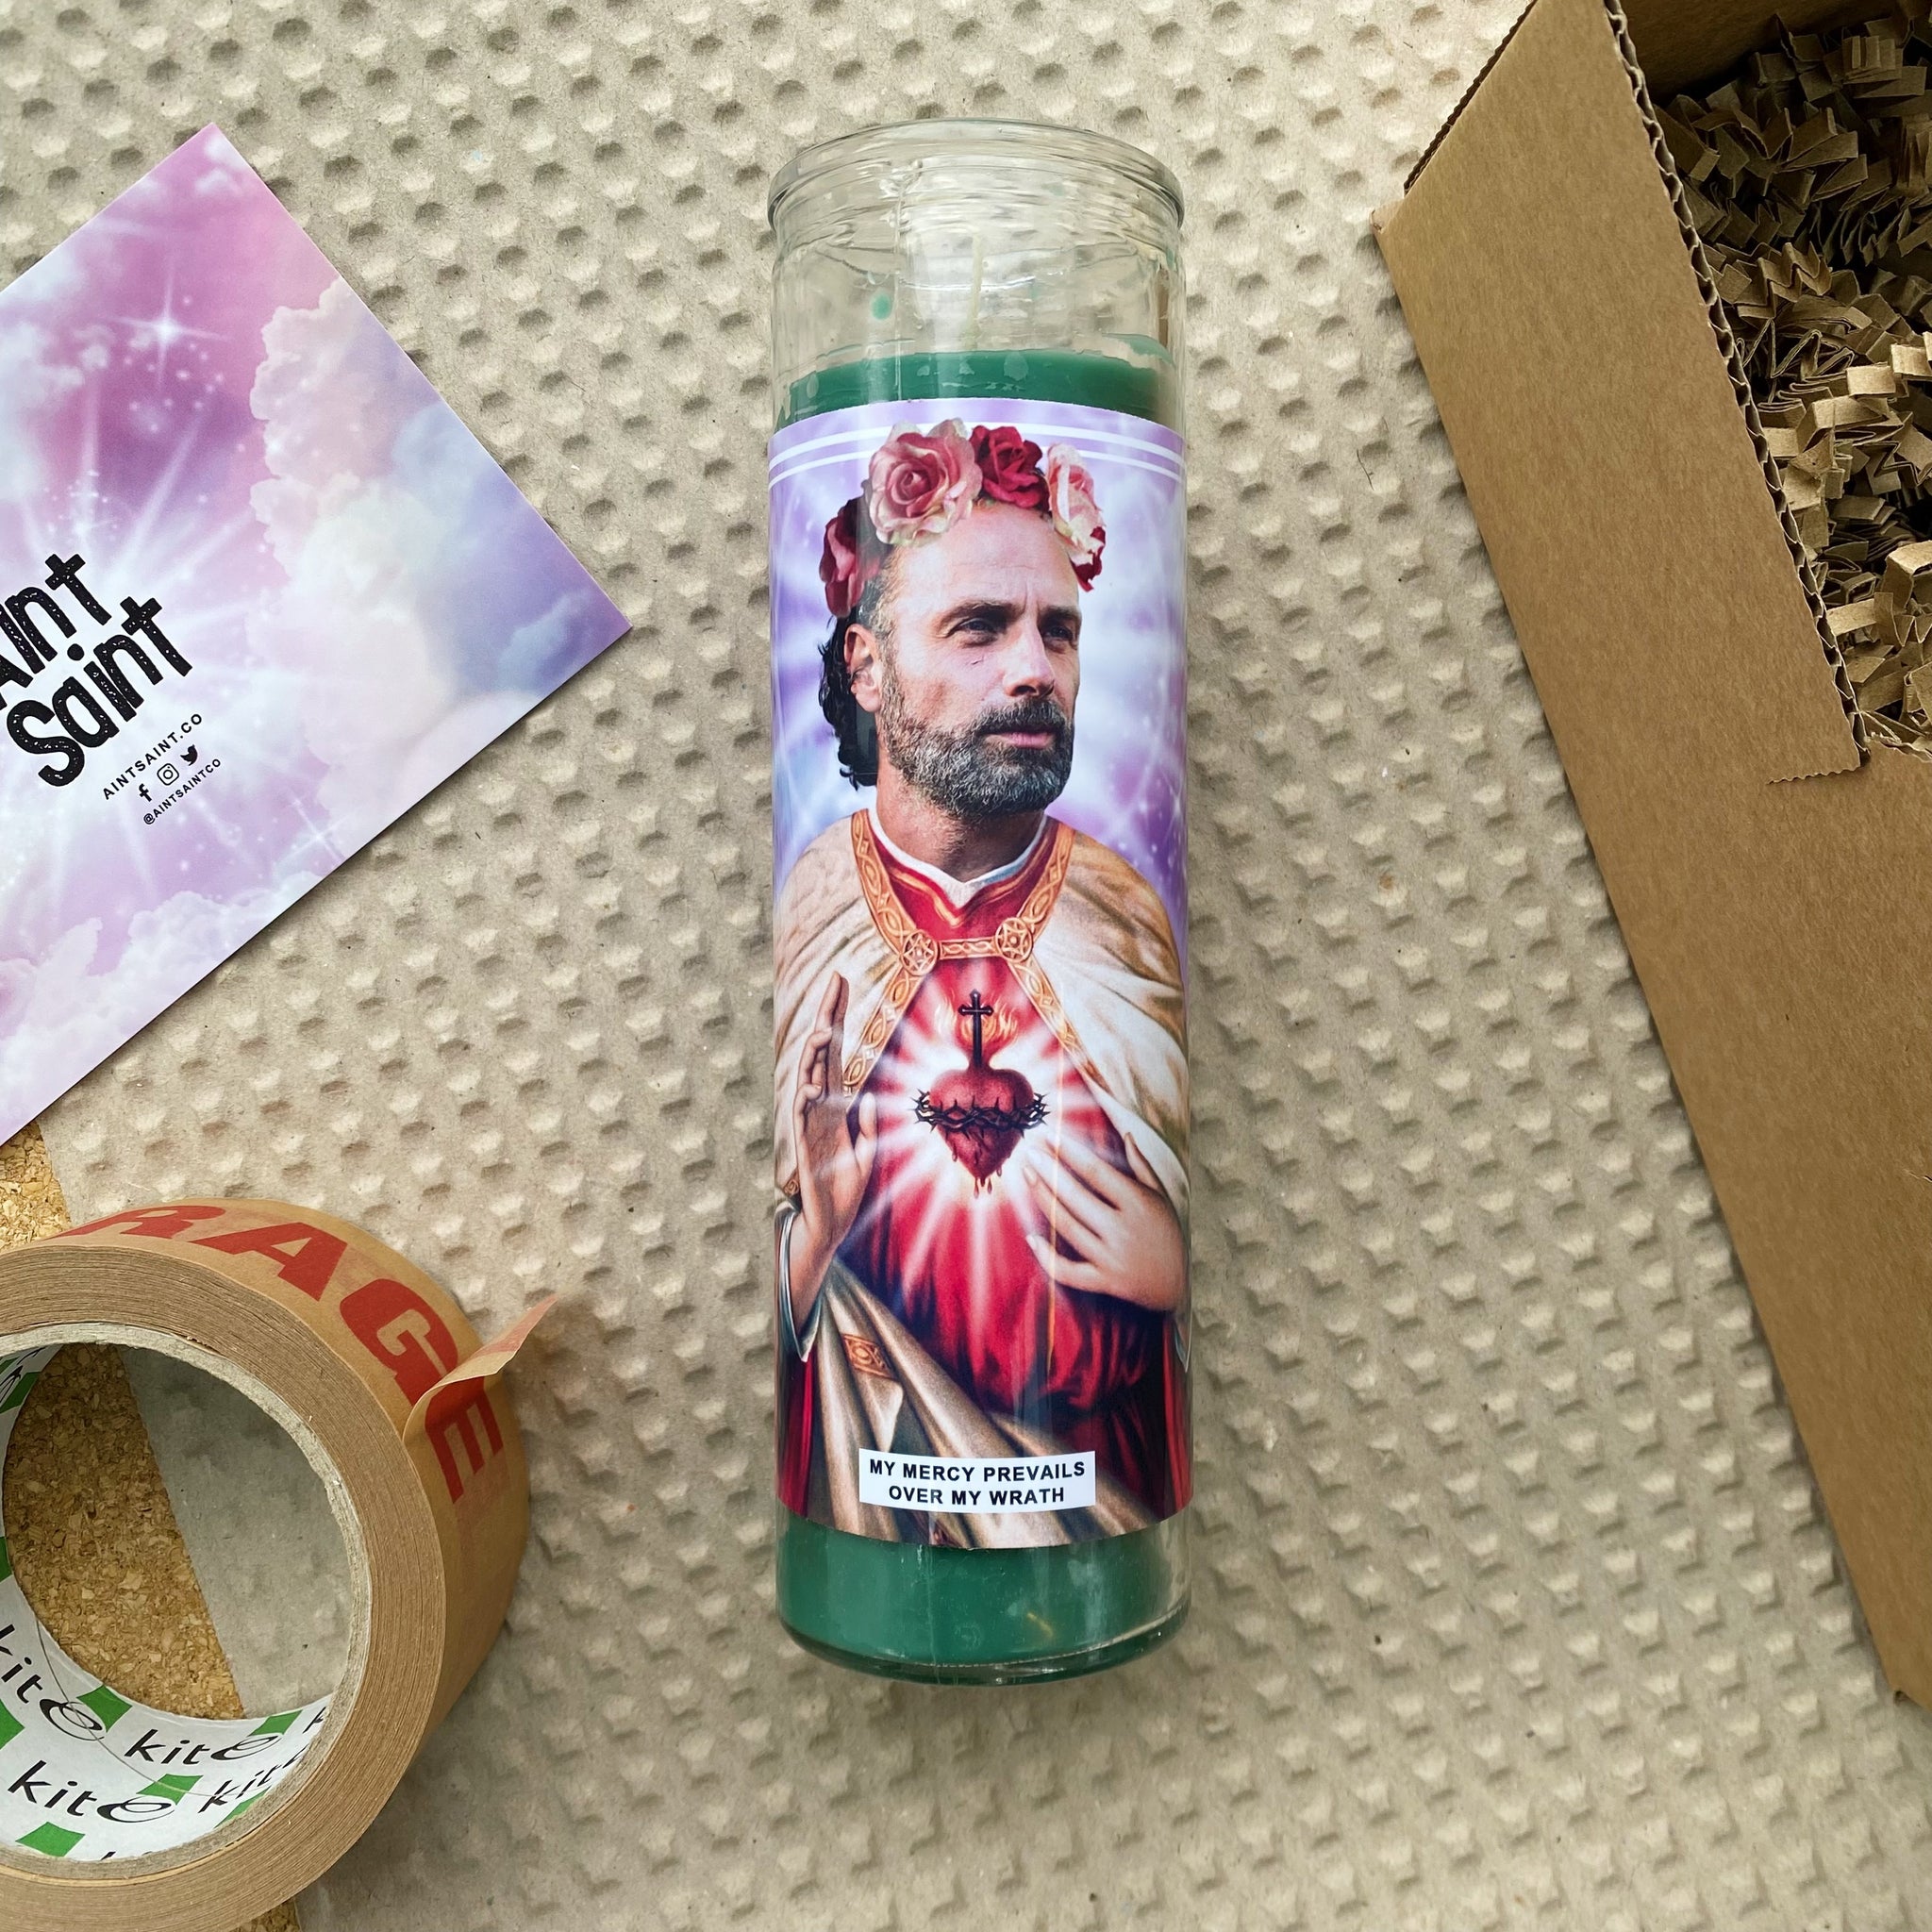 Saint Rick Grimes | Andrew Lincoln | Walking Dead Prayer Candle